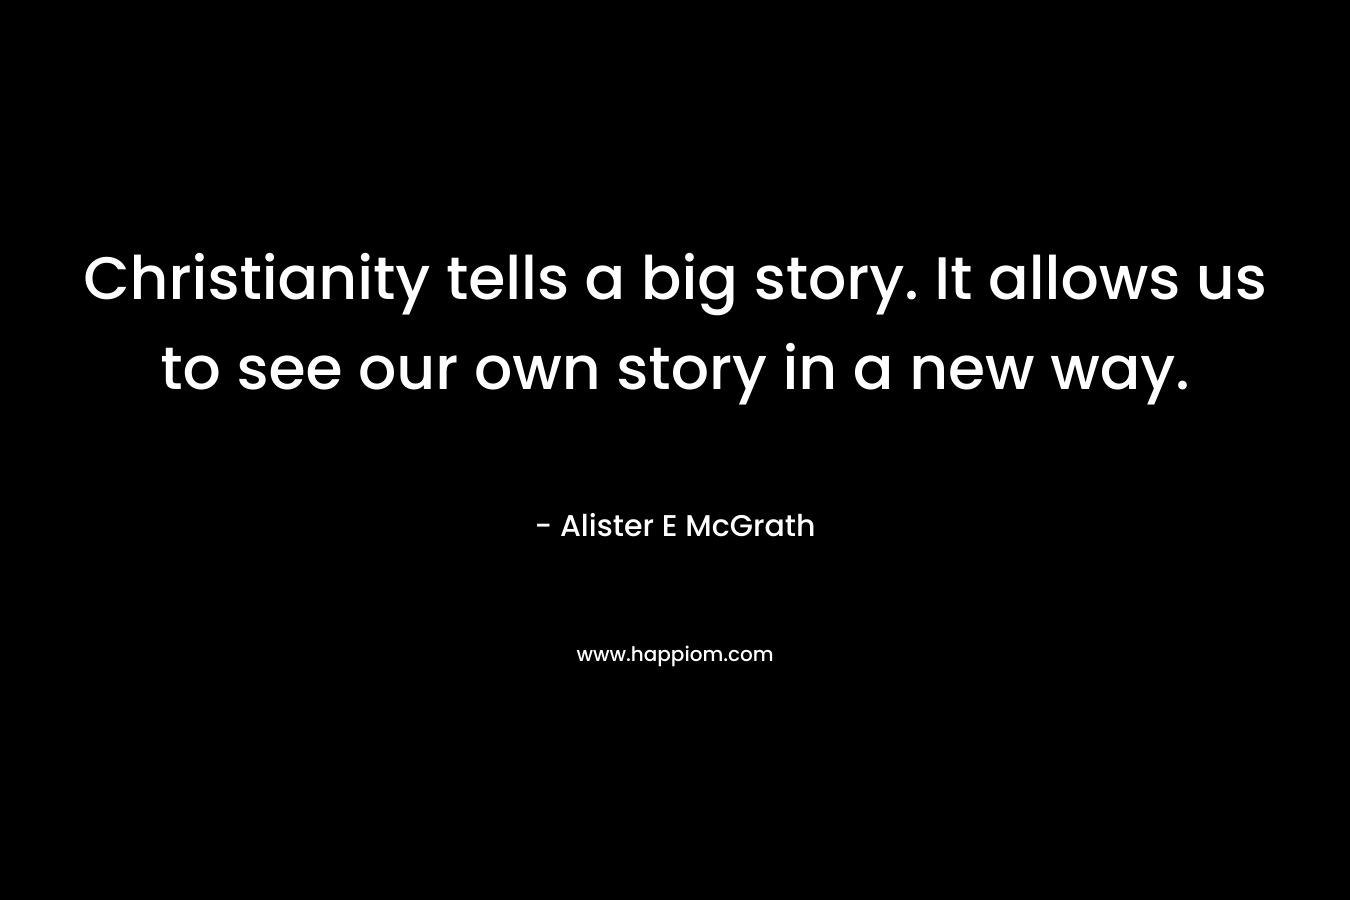 Christianity tells a big story. It allows us to see our own story in a new way. – Alister E McGrath